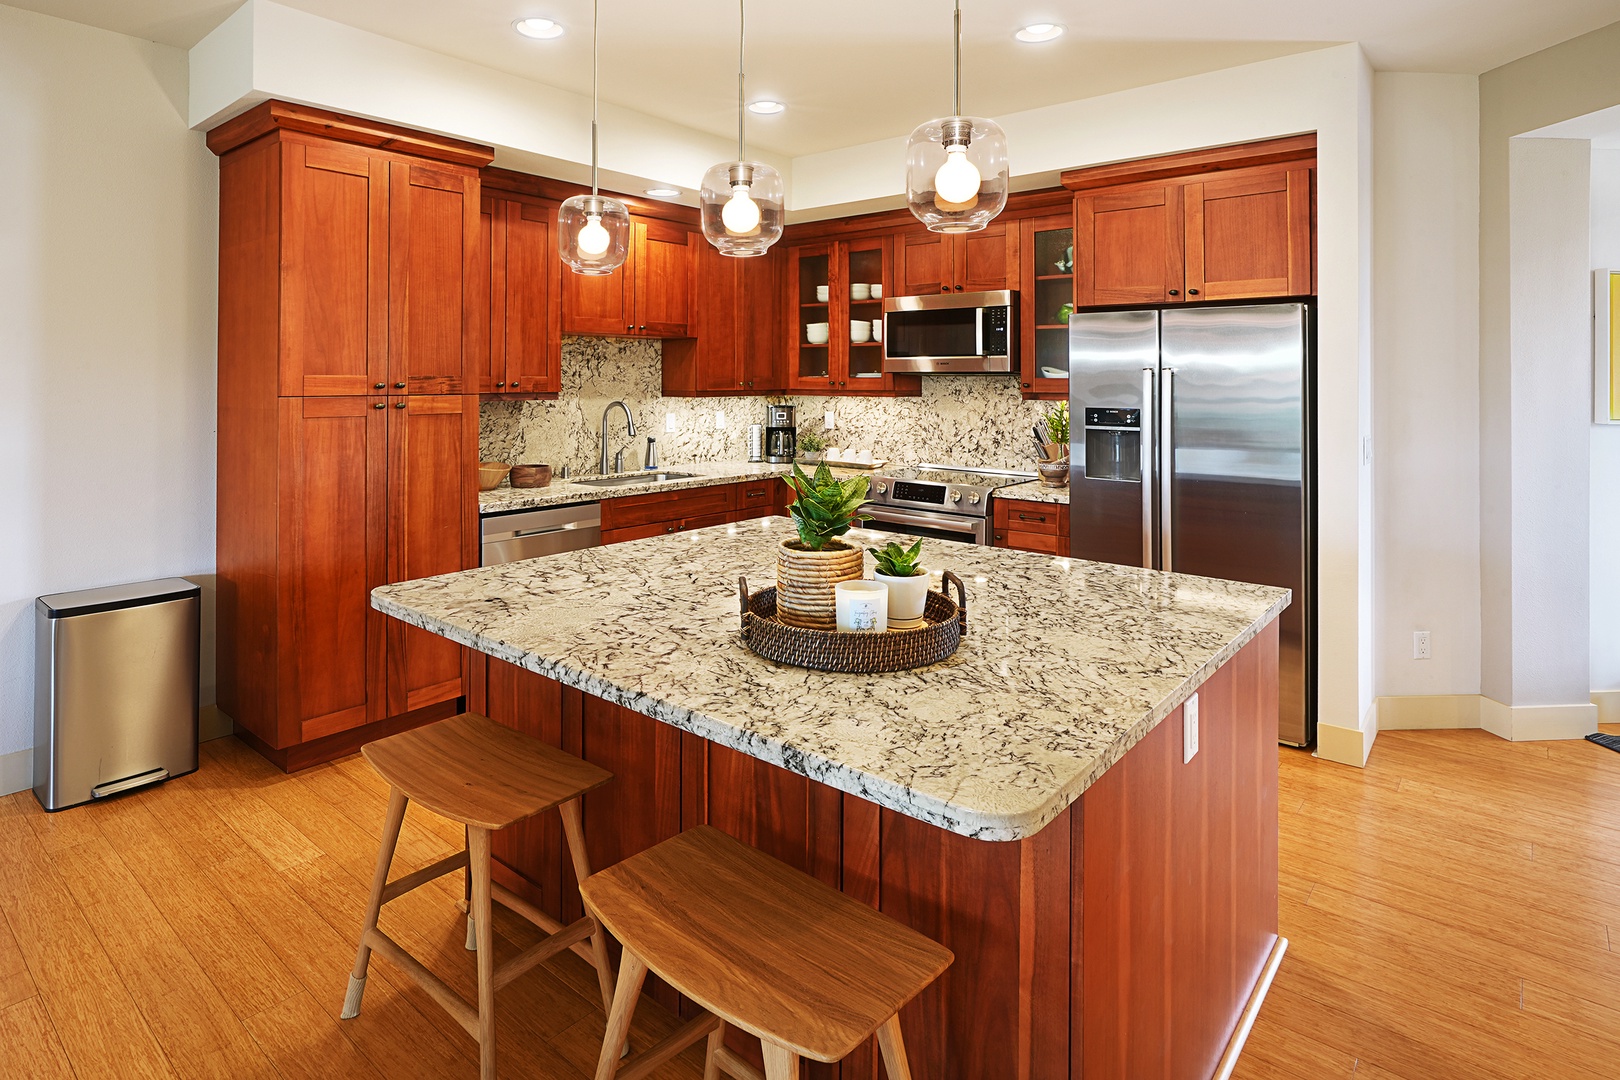 Koloa Vacation Rentals, Pili Mai 11K - The kitchen is fully equipped with stainless steel appliances and breakfast bar seating.